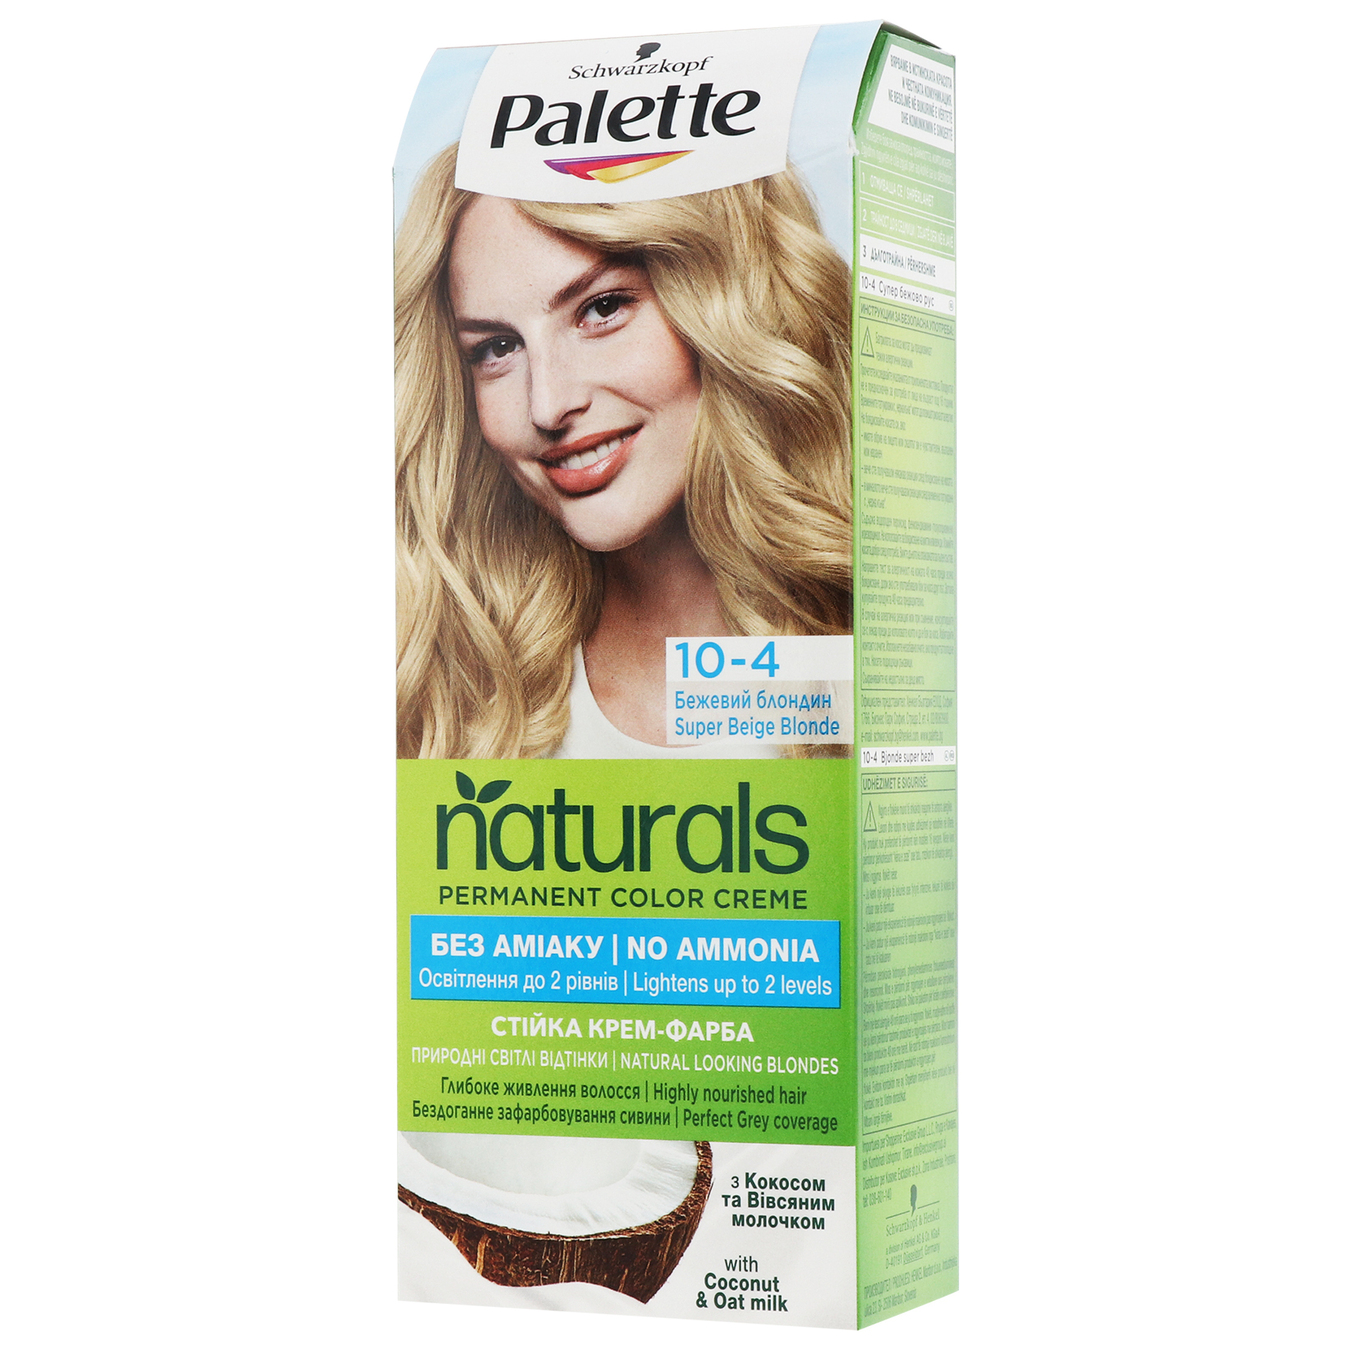 Cream-dye Palette Naturals 10-4 Beige blond without ammonia permanent hair color 110ml 3